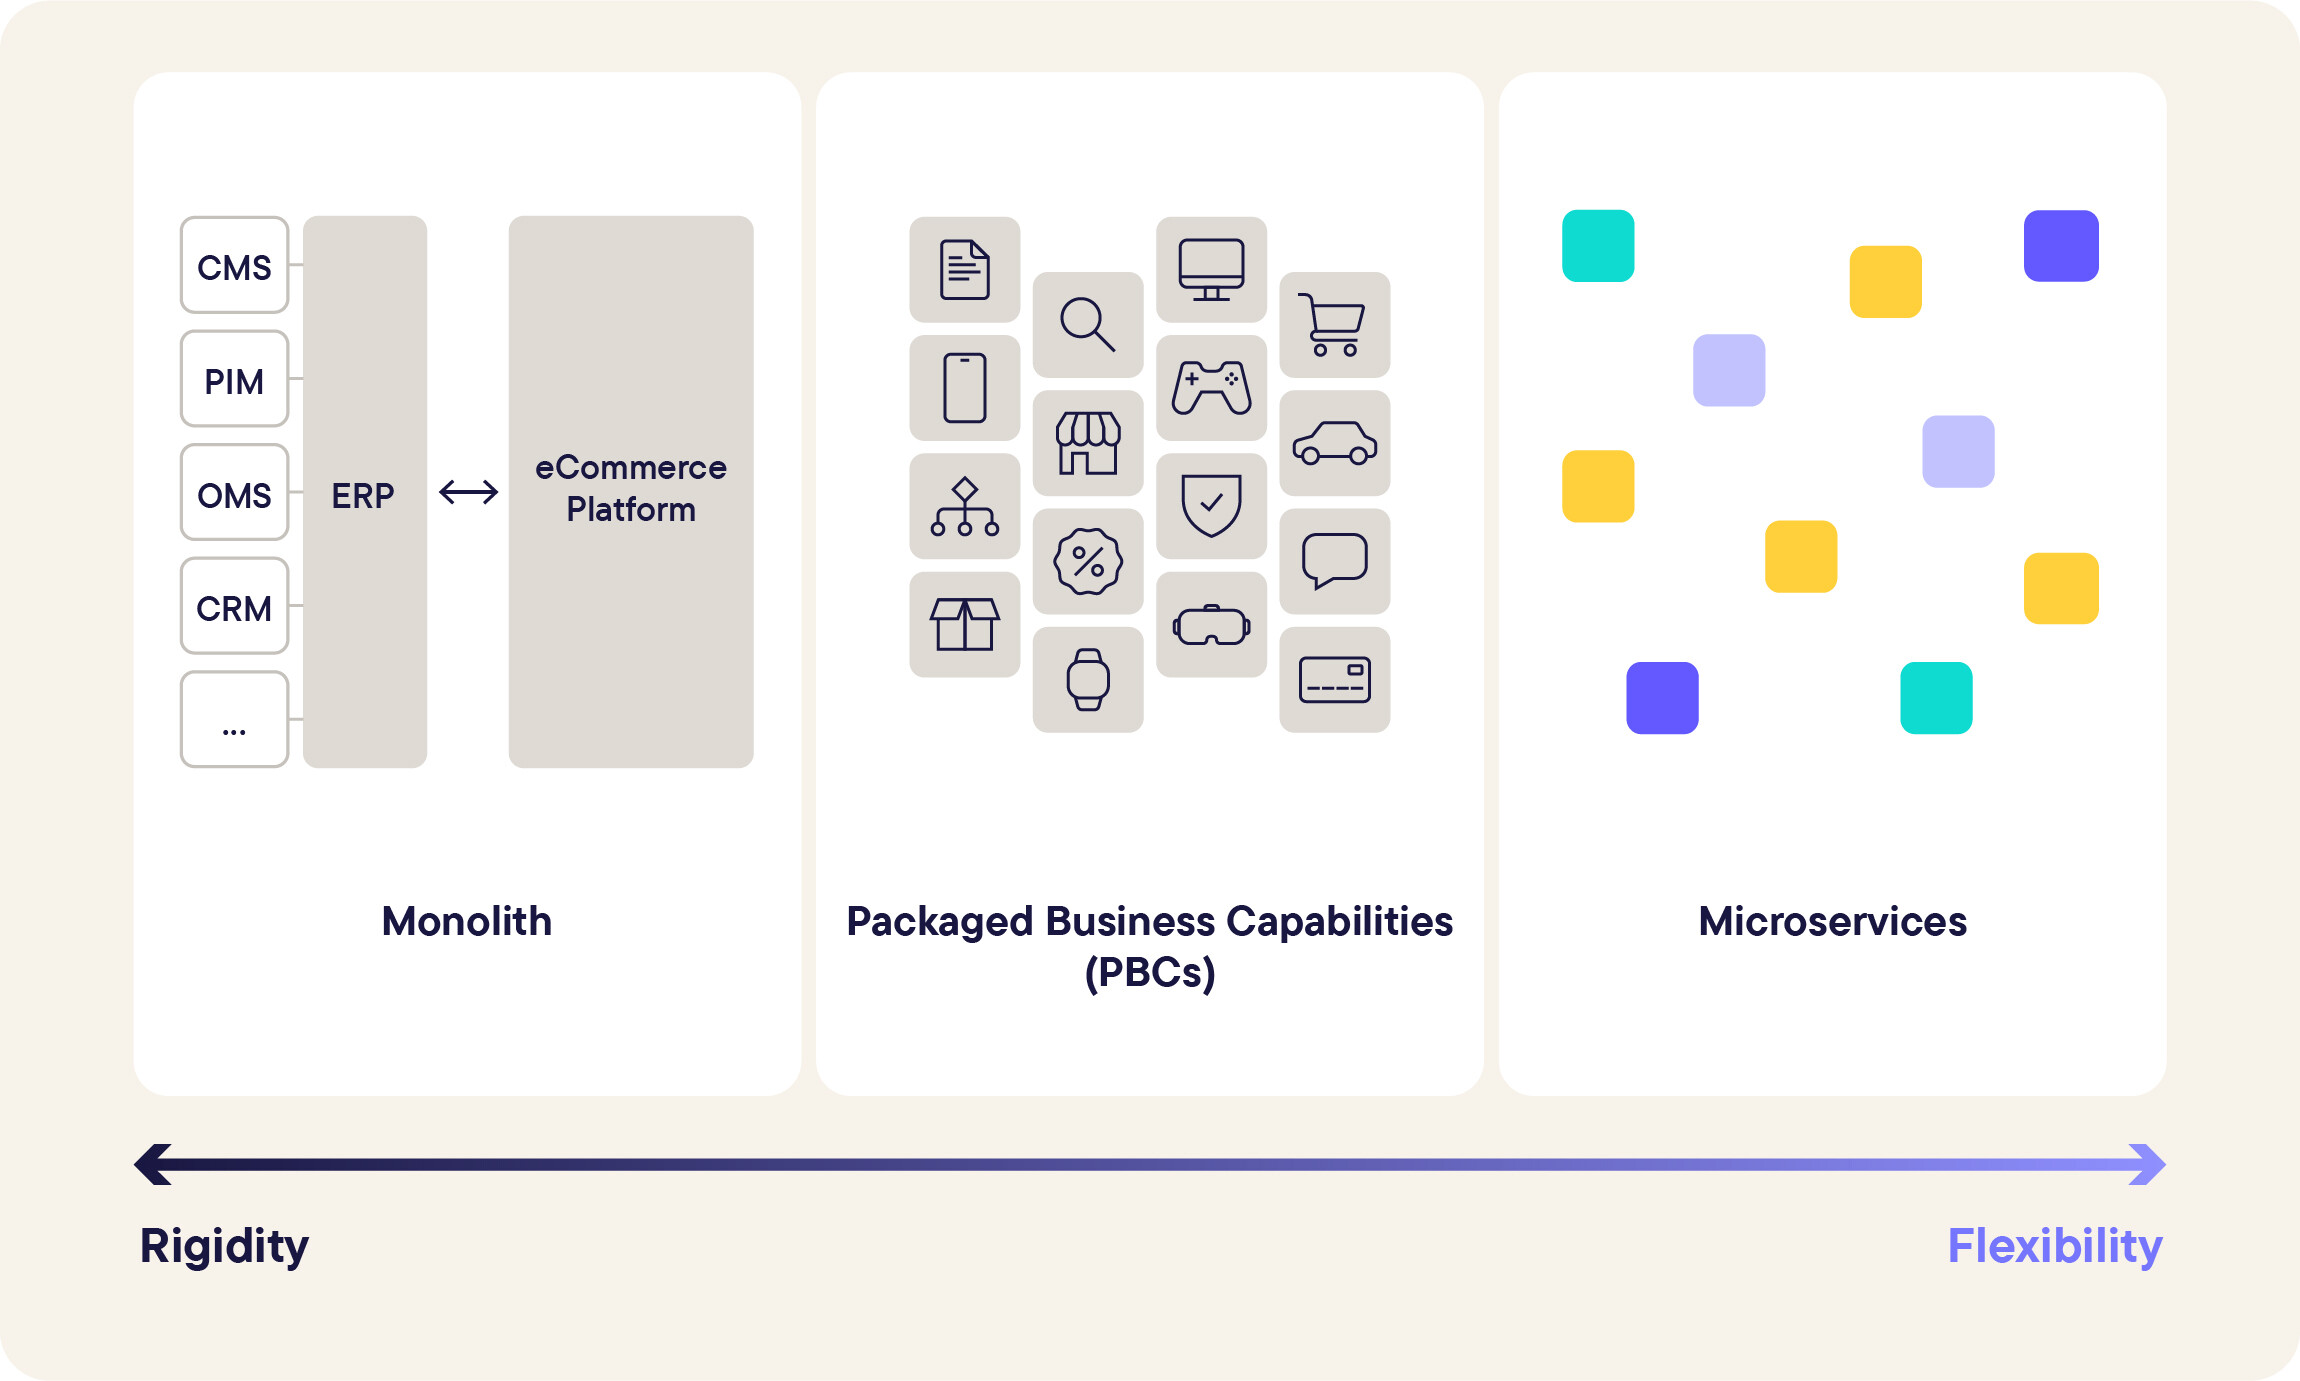 Microservices vs. Packaged Business Capabilities (PBCs)